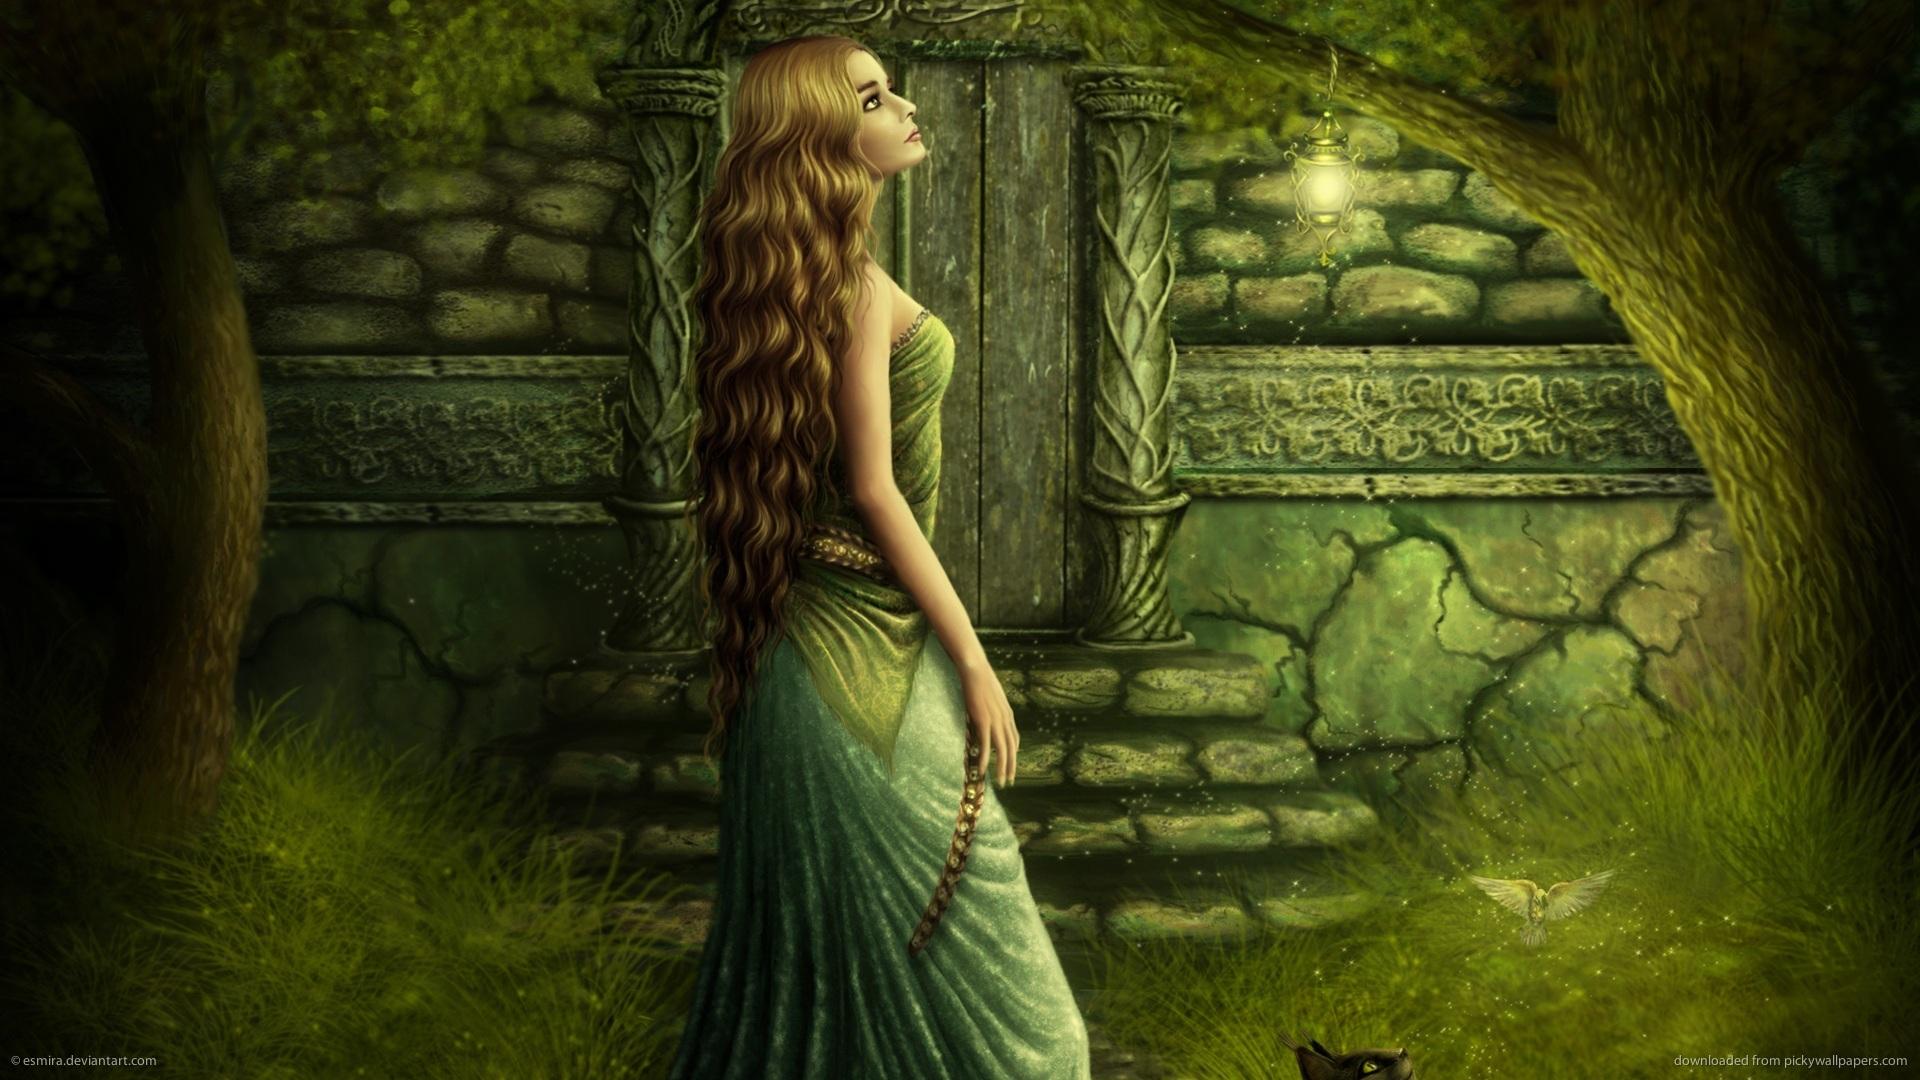 Fairytale Gallery of Wallpaper. Free Download For Android